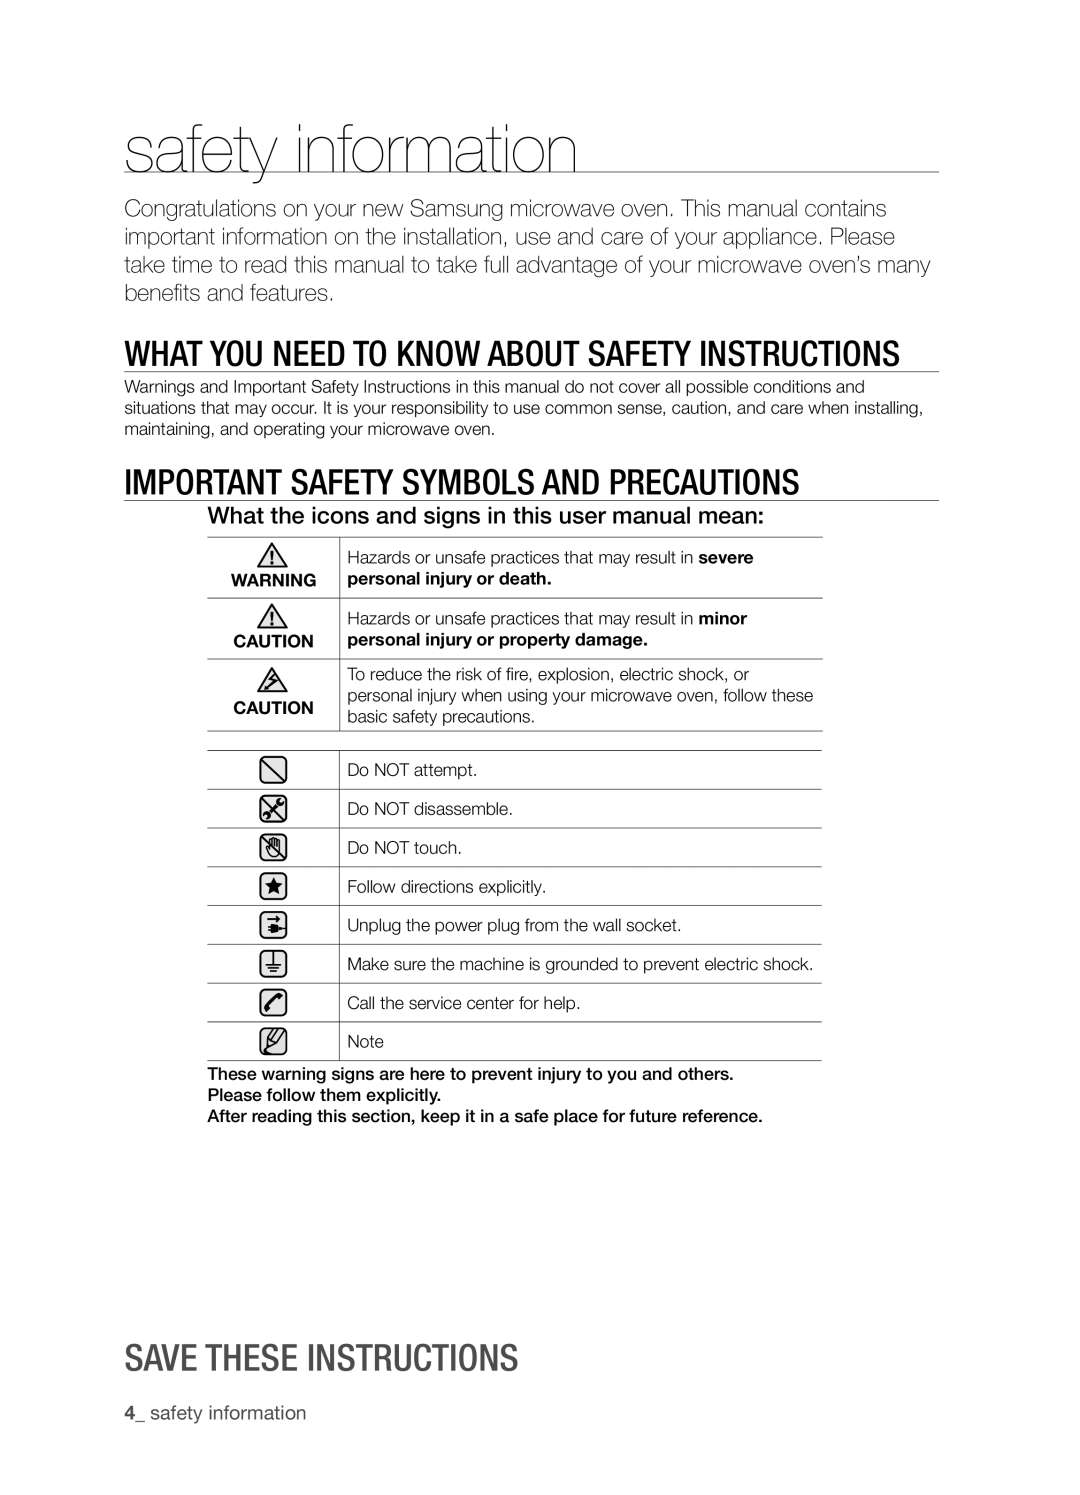 Samsung SMK9175ST user manual What you need to know about safety instructions, Important safety symbols and precautions 